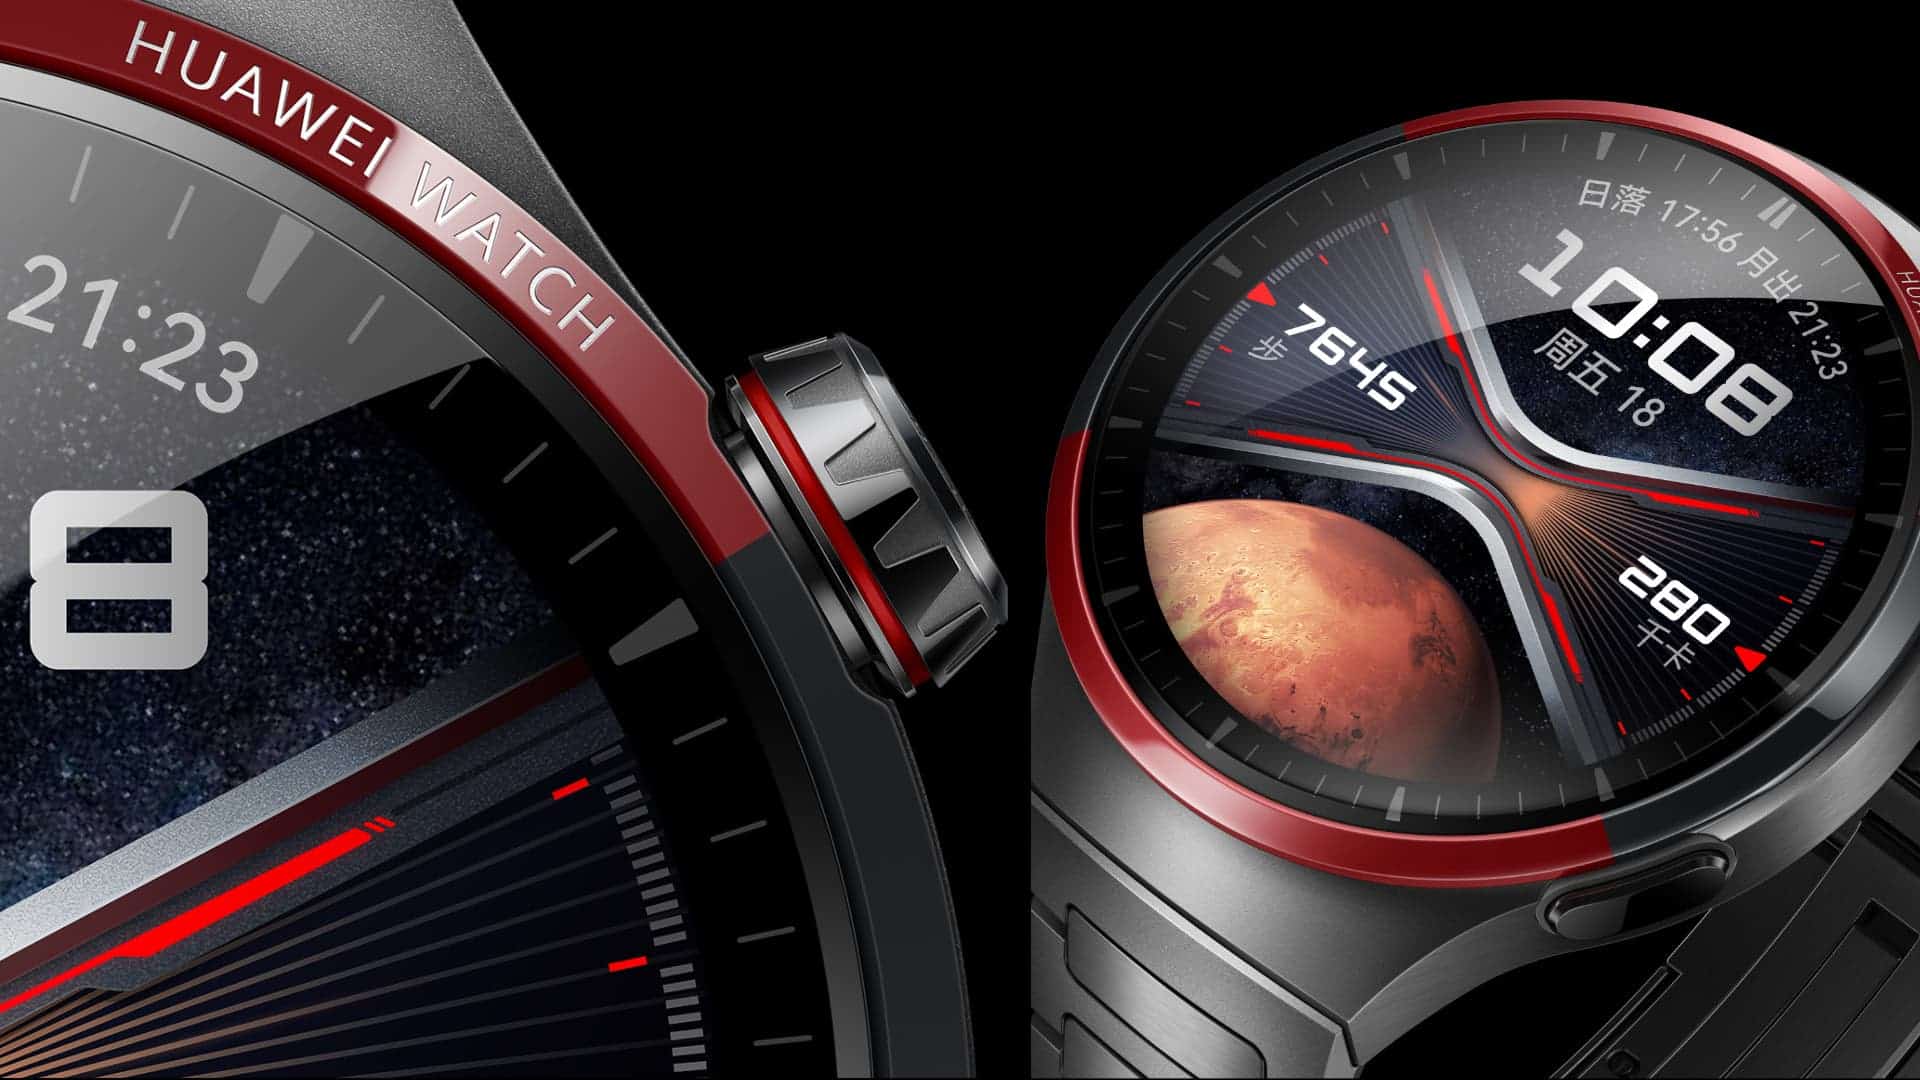 Desing of Watch 4 Pro Space Exploration Edition